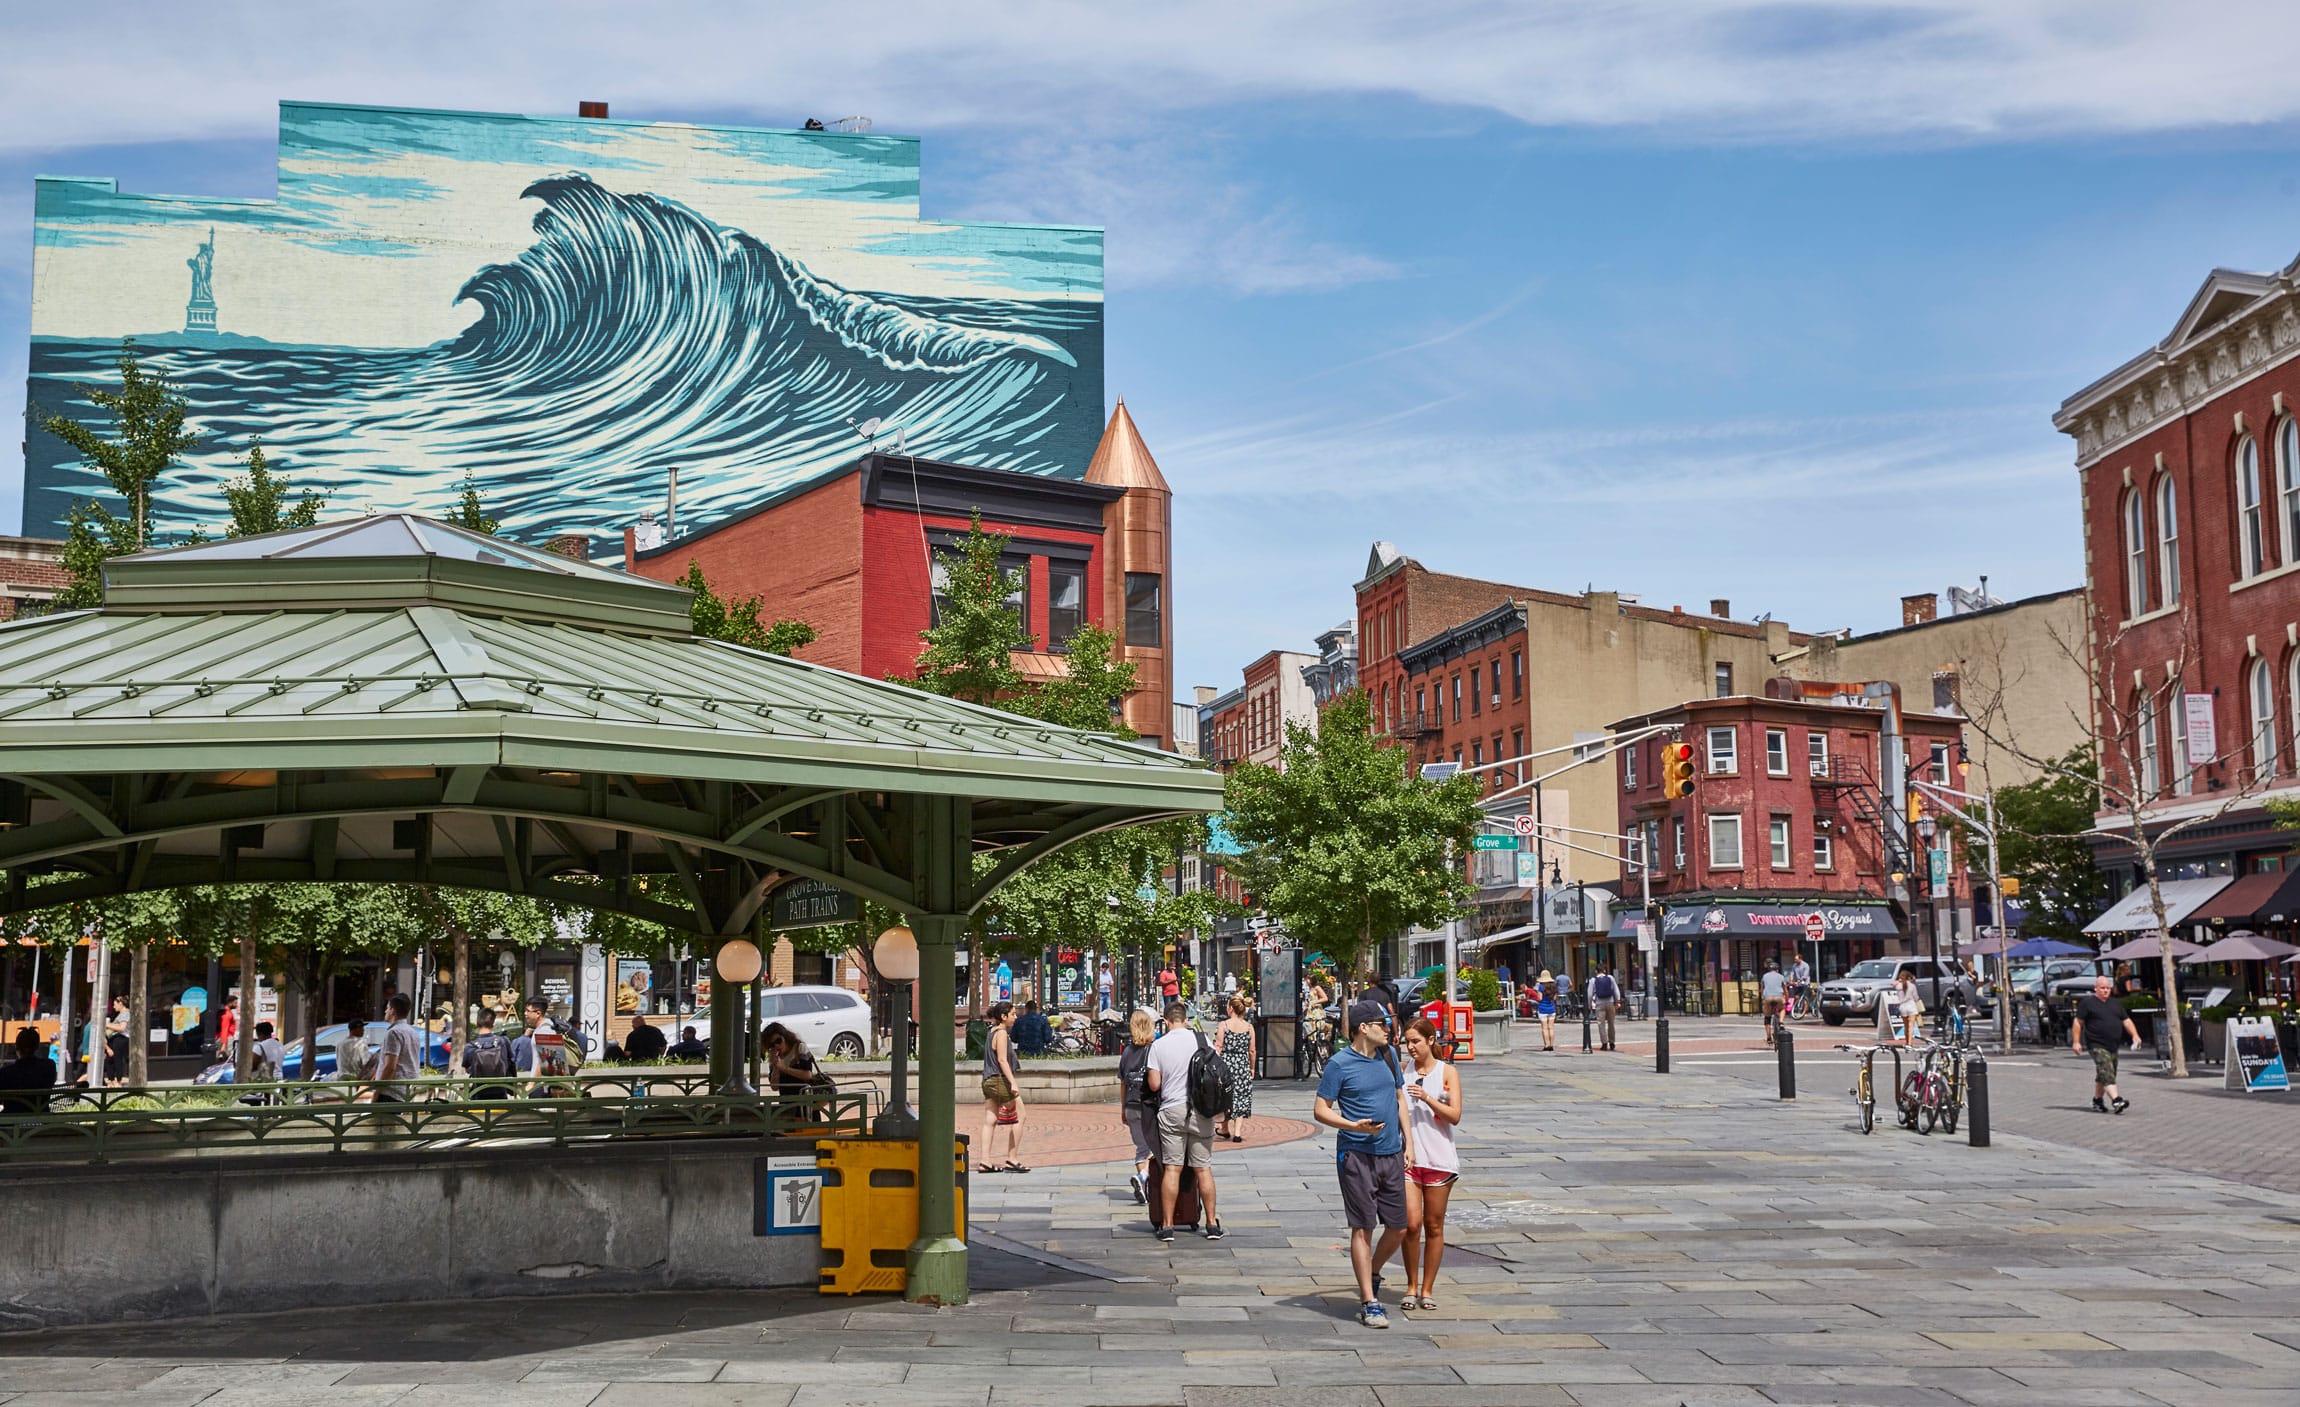 Pedestrians walking along the street with a mural of a large wave in the back